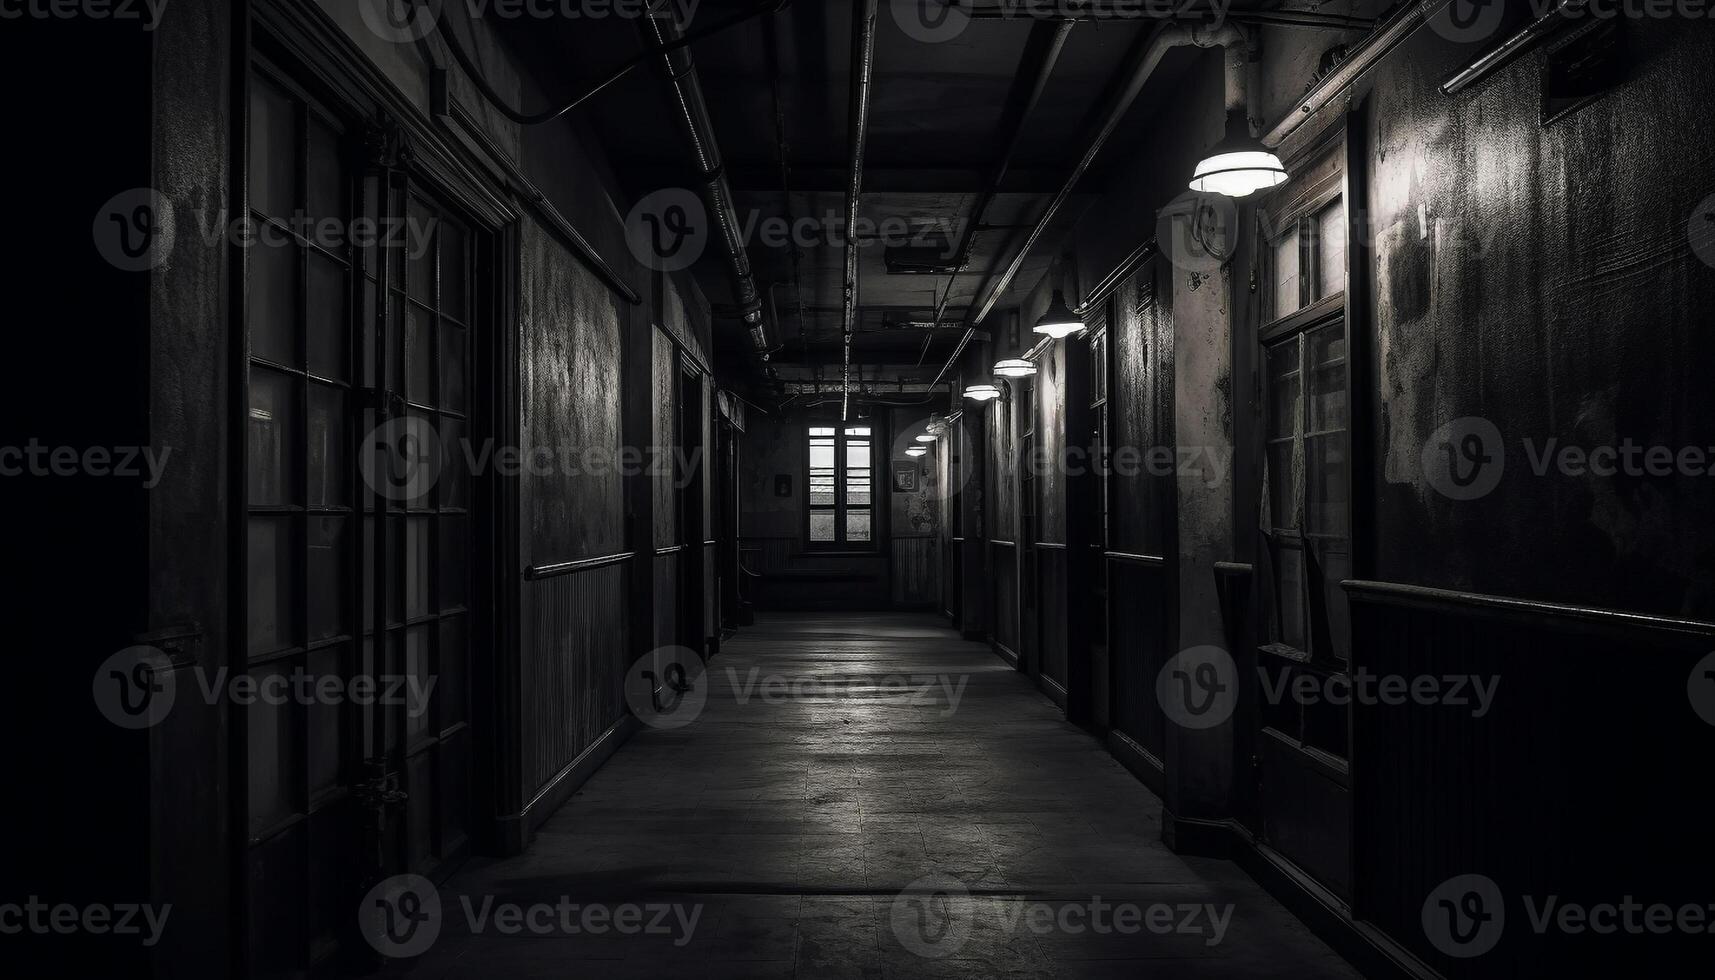 The spooky old hospital abandoned entrance hall had a dimly lit corridor generated by AI photo